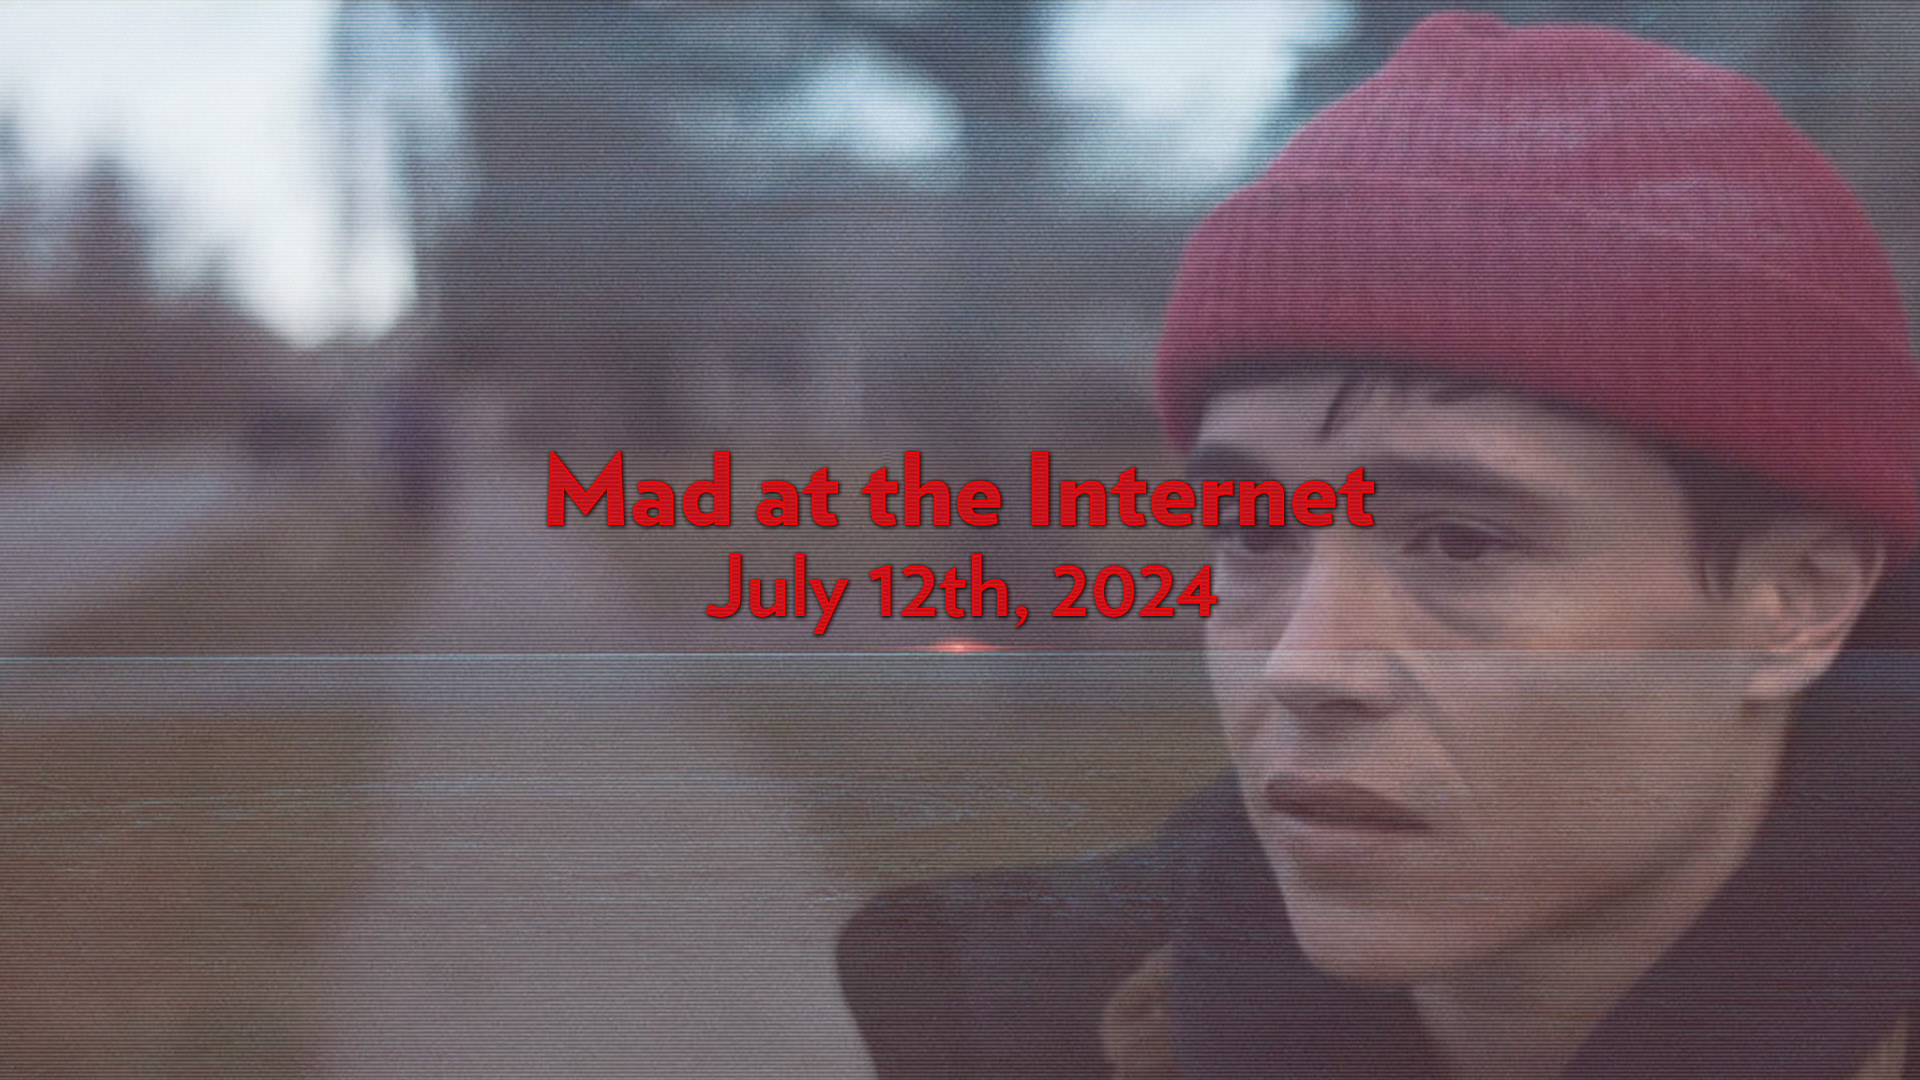 Anggy (July 12th, 2024) - Mad at the Internet